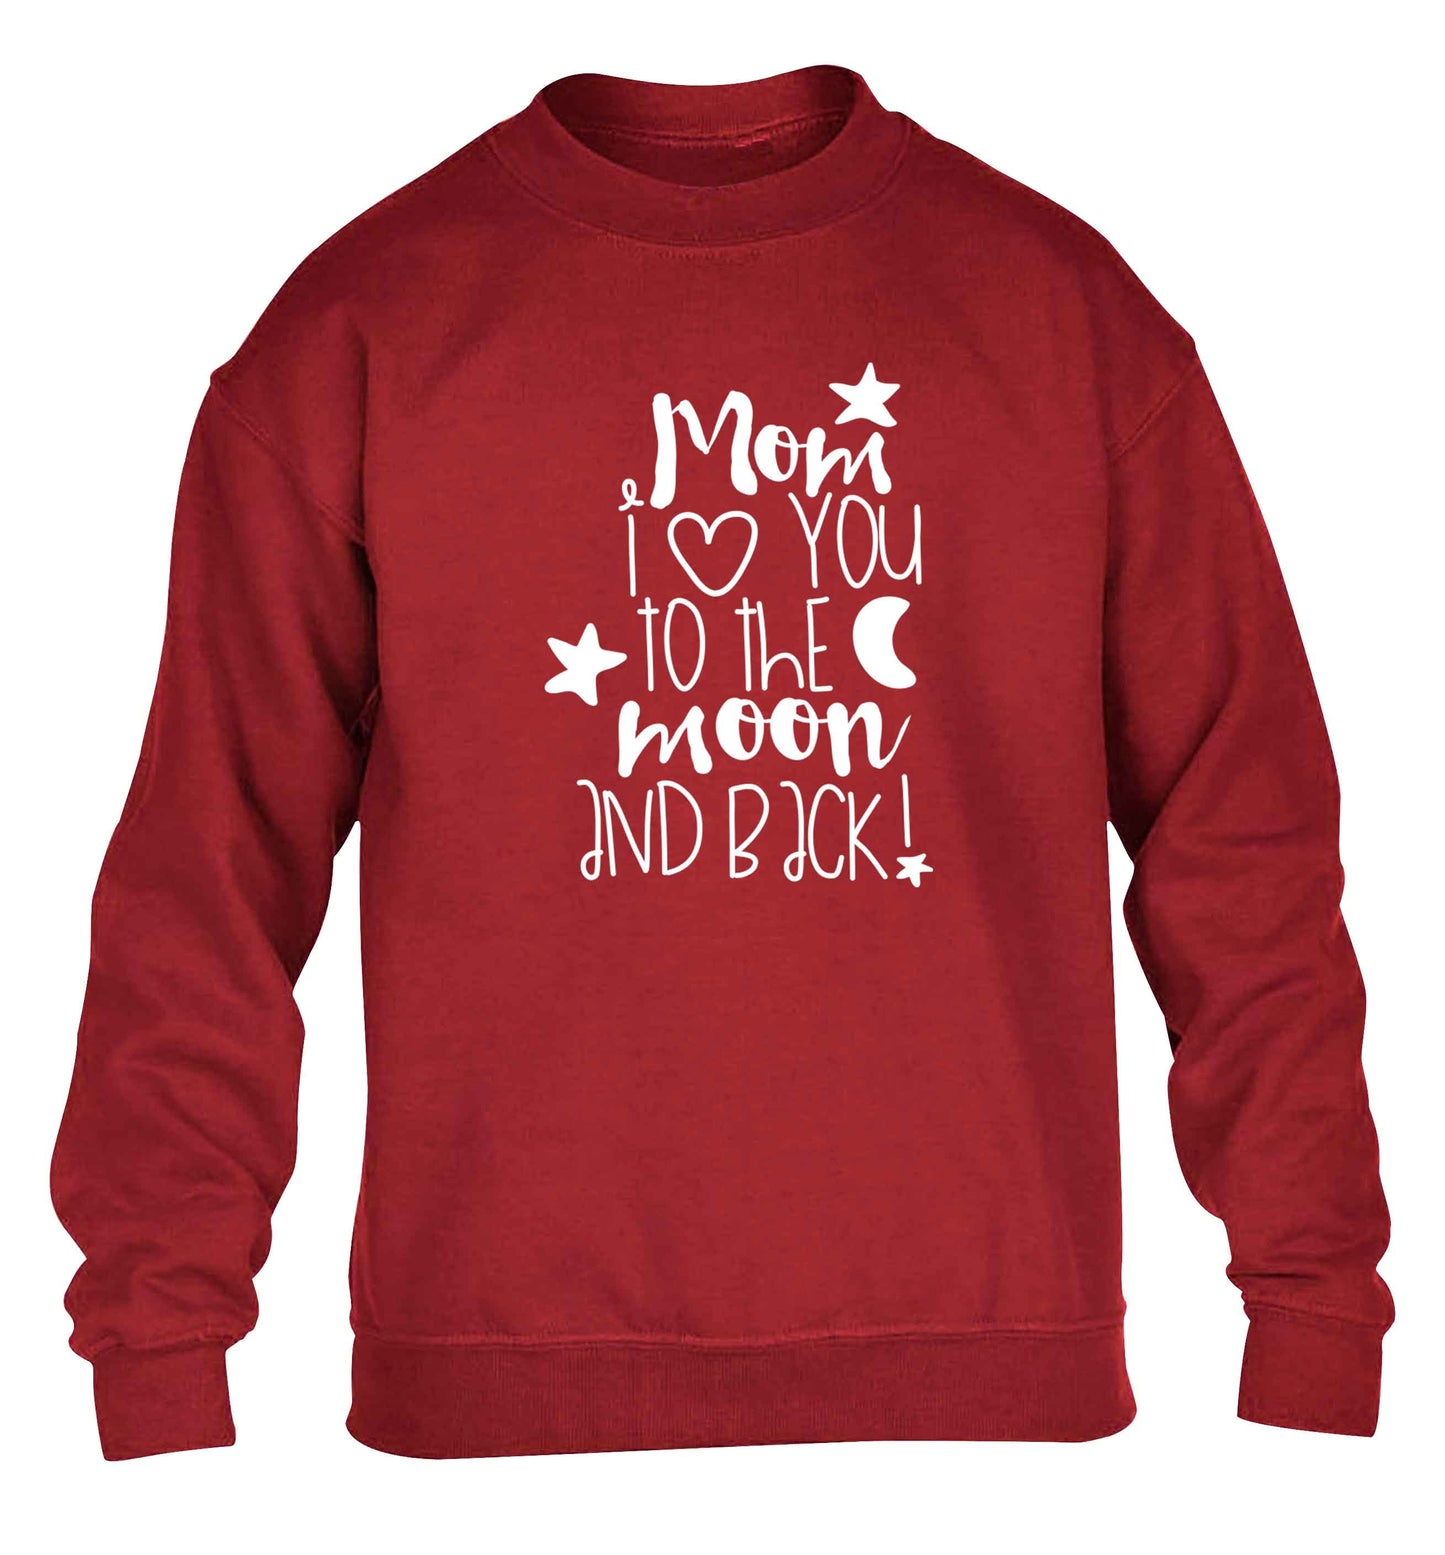 Mom I love you to the moon and back children's grey sweater 12-13 Years